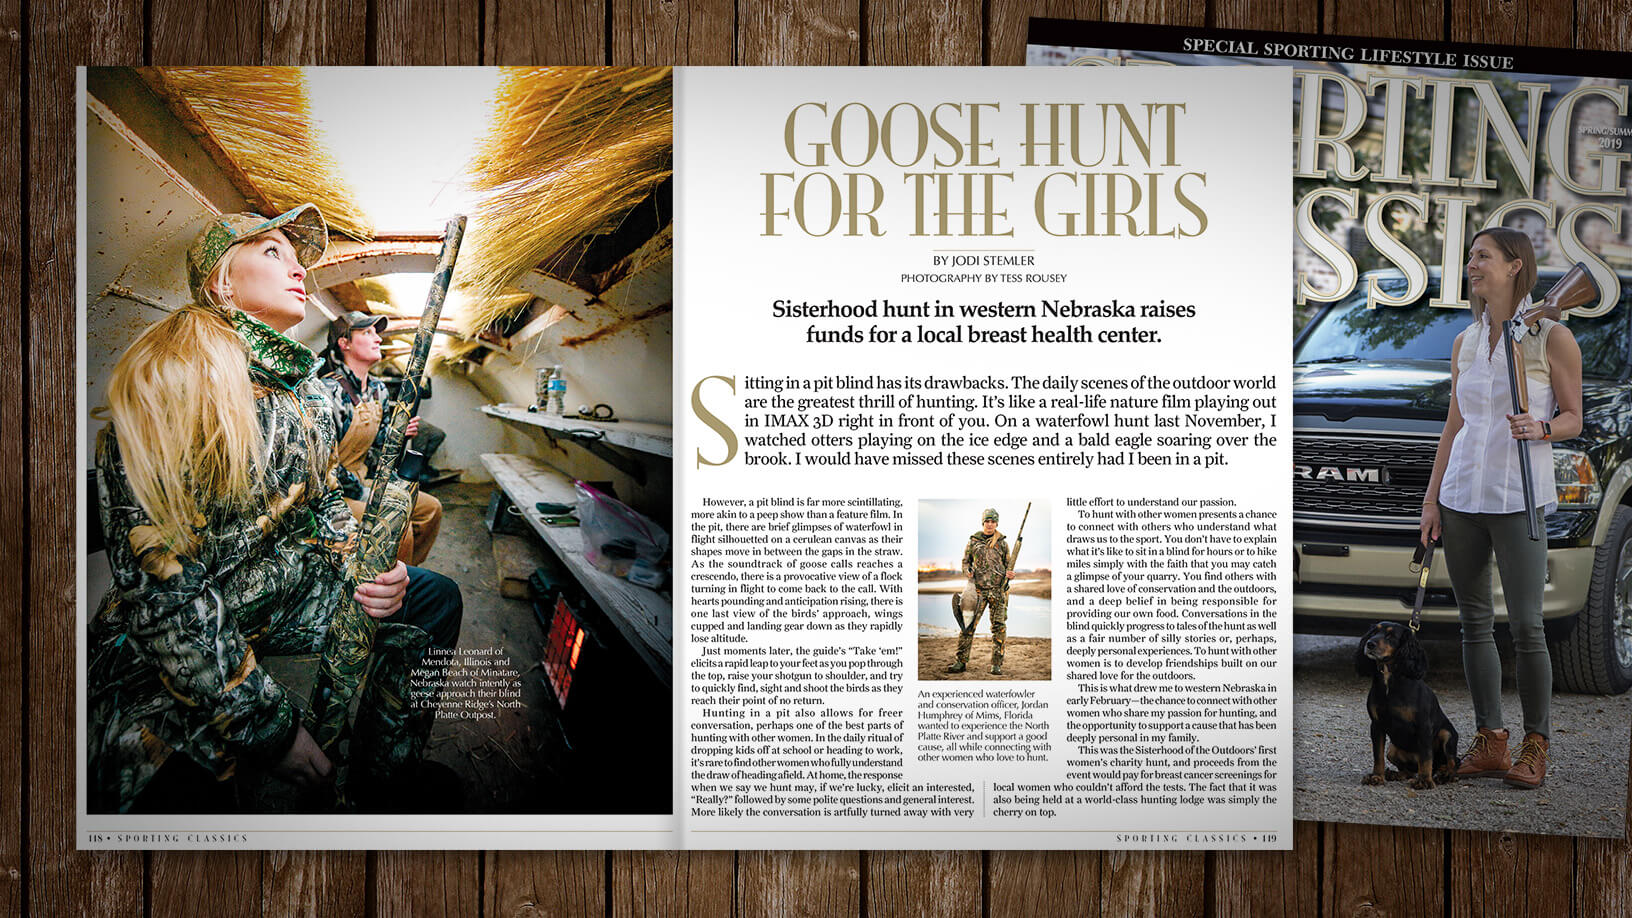 [Sporting Classics: Spring/Summer 2019] Goose Hunt for the Girls